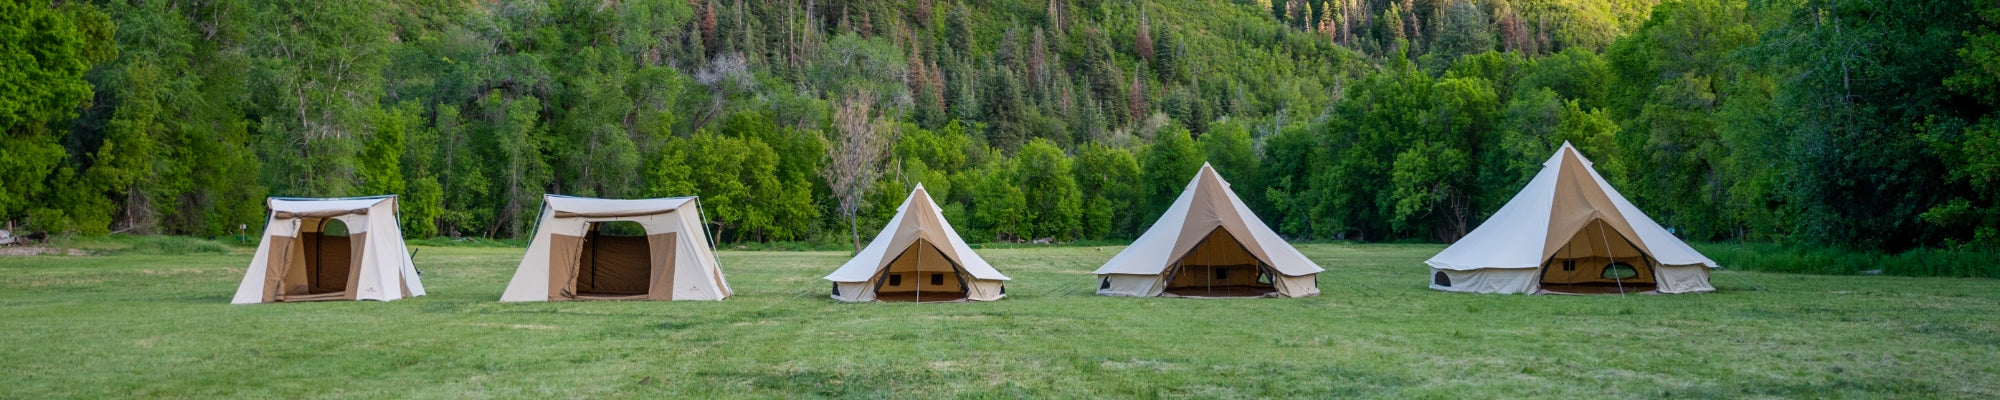 Image shows all five sizes and styles of TETON Sports canvas tents in a row on a grassy field surrounded by green trees.